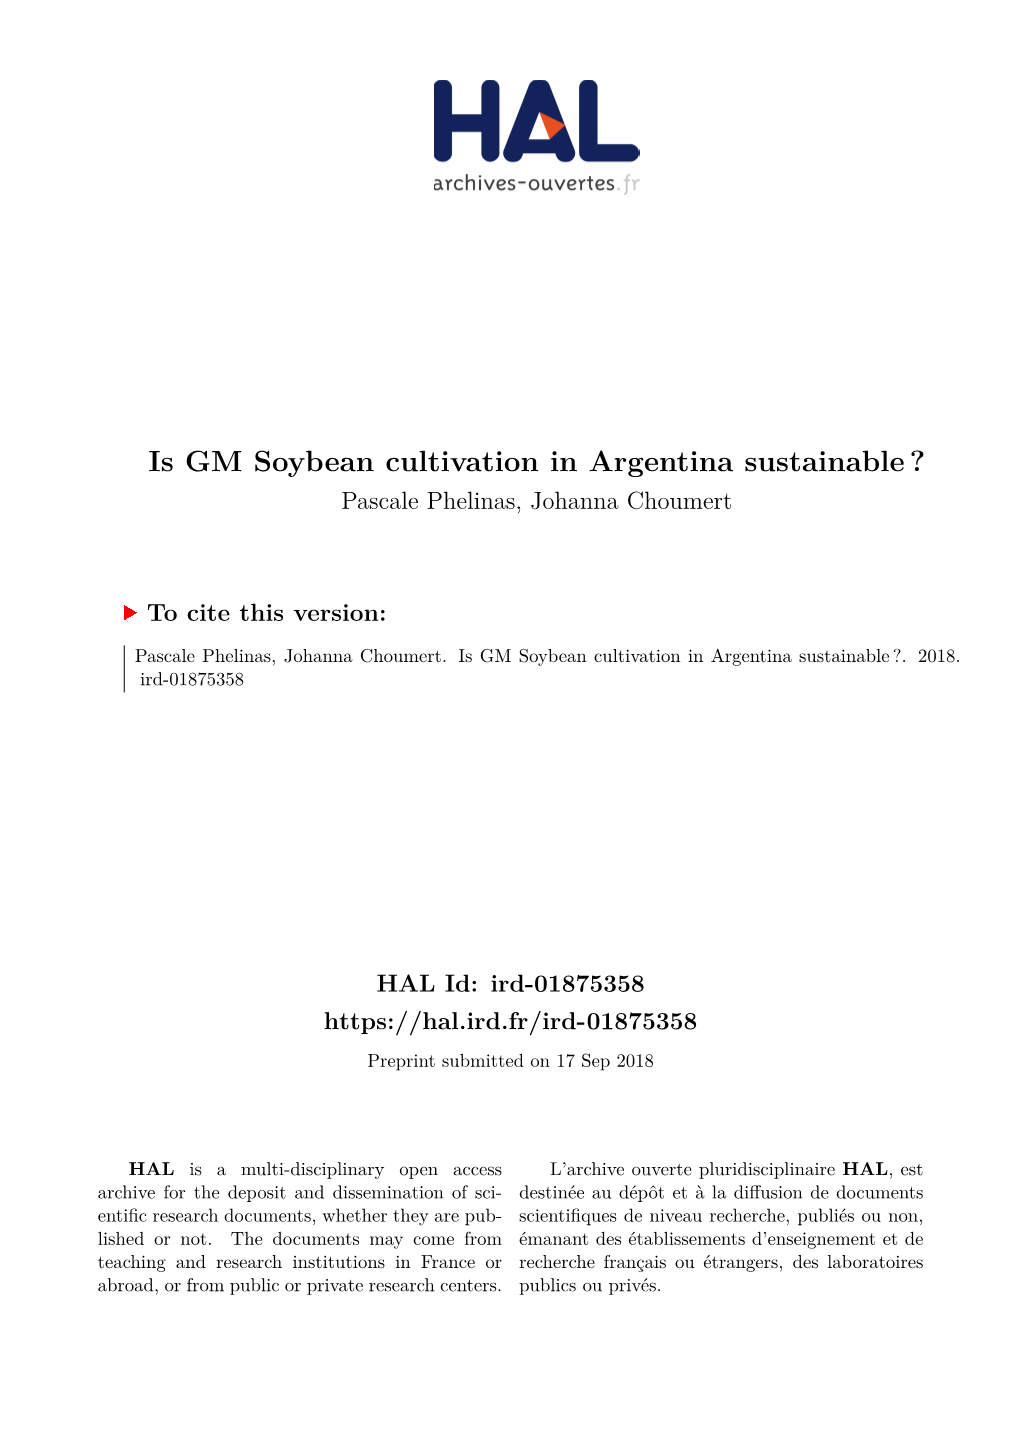 Is GM Soybean Cultivation in Argentina Sustainable?